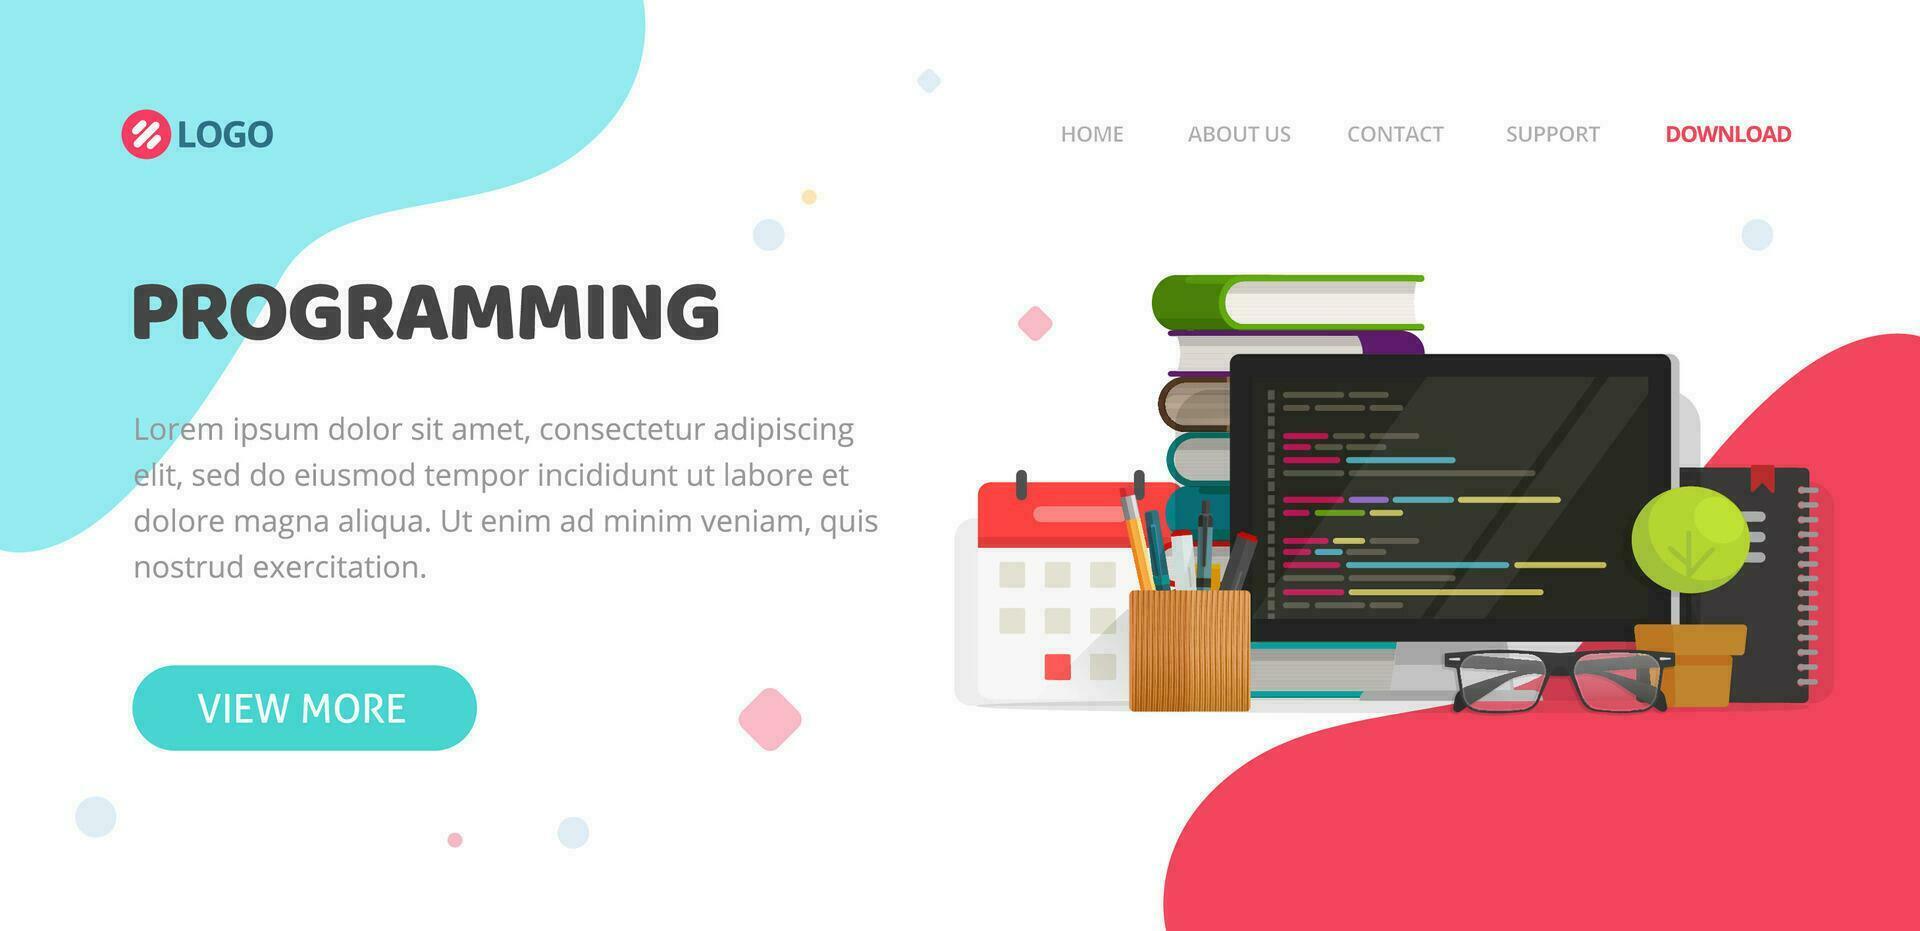 Programming or coding service agency website template design vector layout or mockup flat cartoon, computer programme code on screen as web site landing page layout or banner design